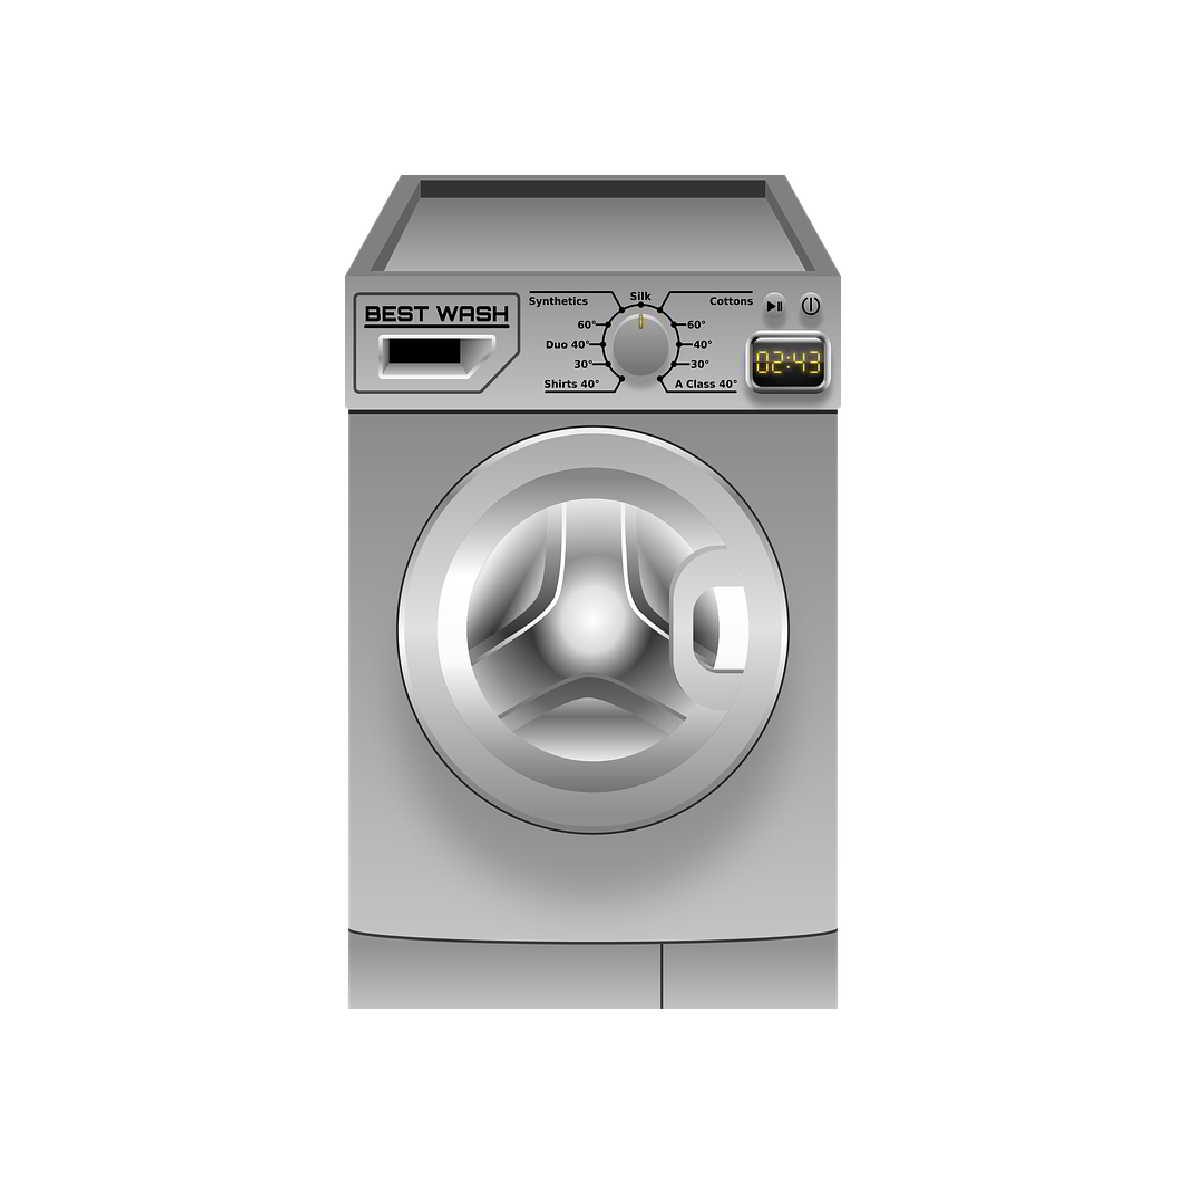 How long does a washing machine take to wash clothes